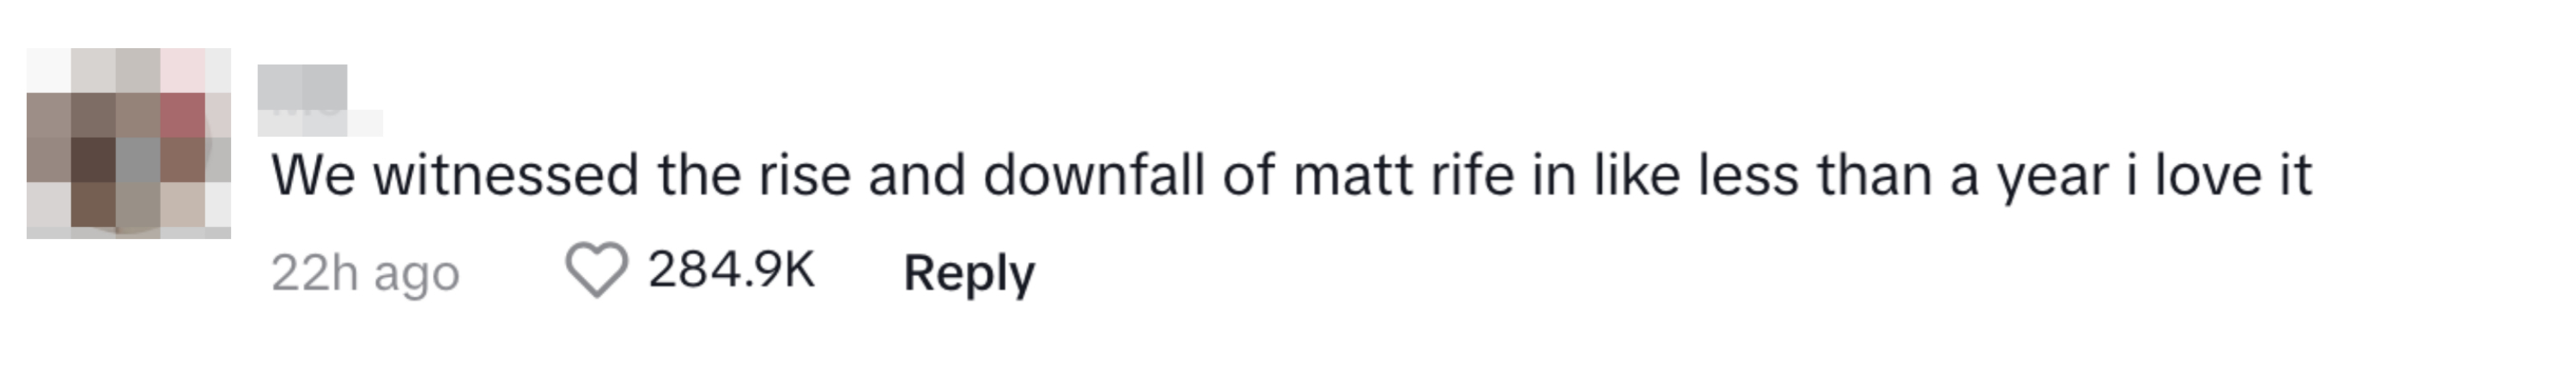 &quot;We witnessed the rise and downfall of matt rife in less than a year i love it&quot;